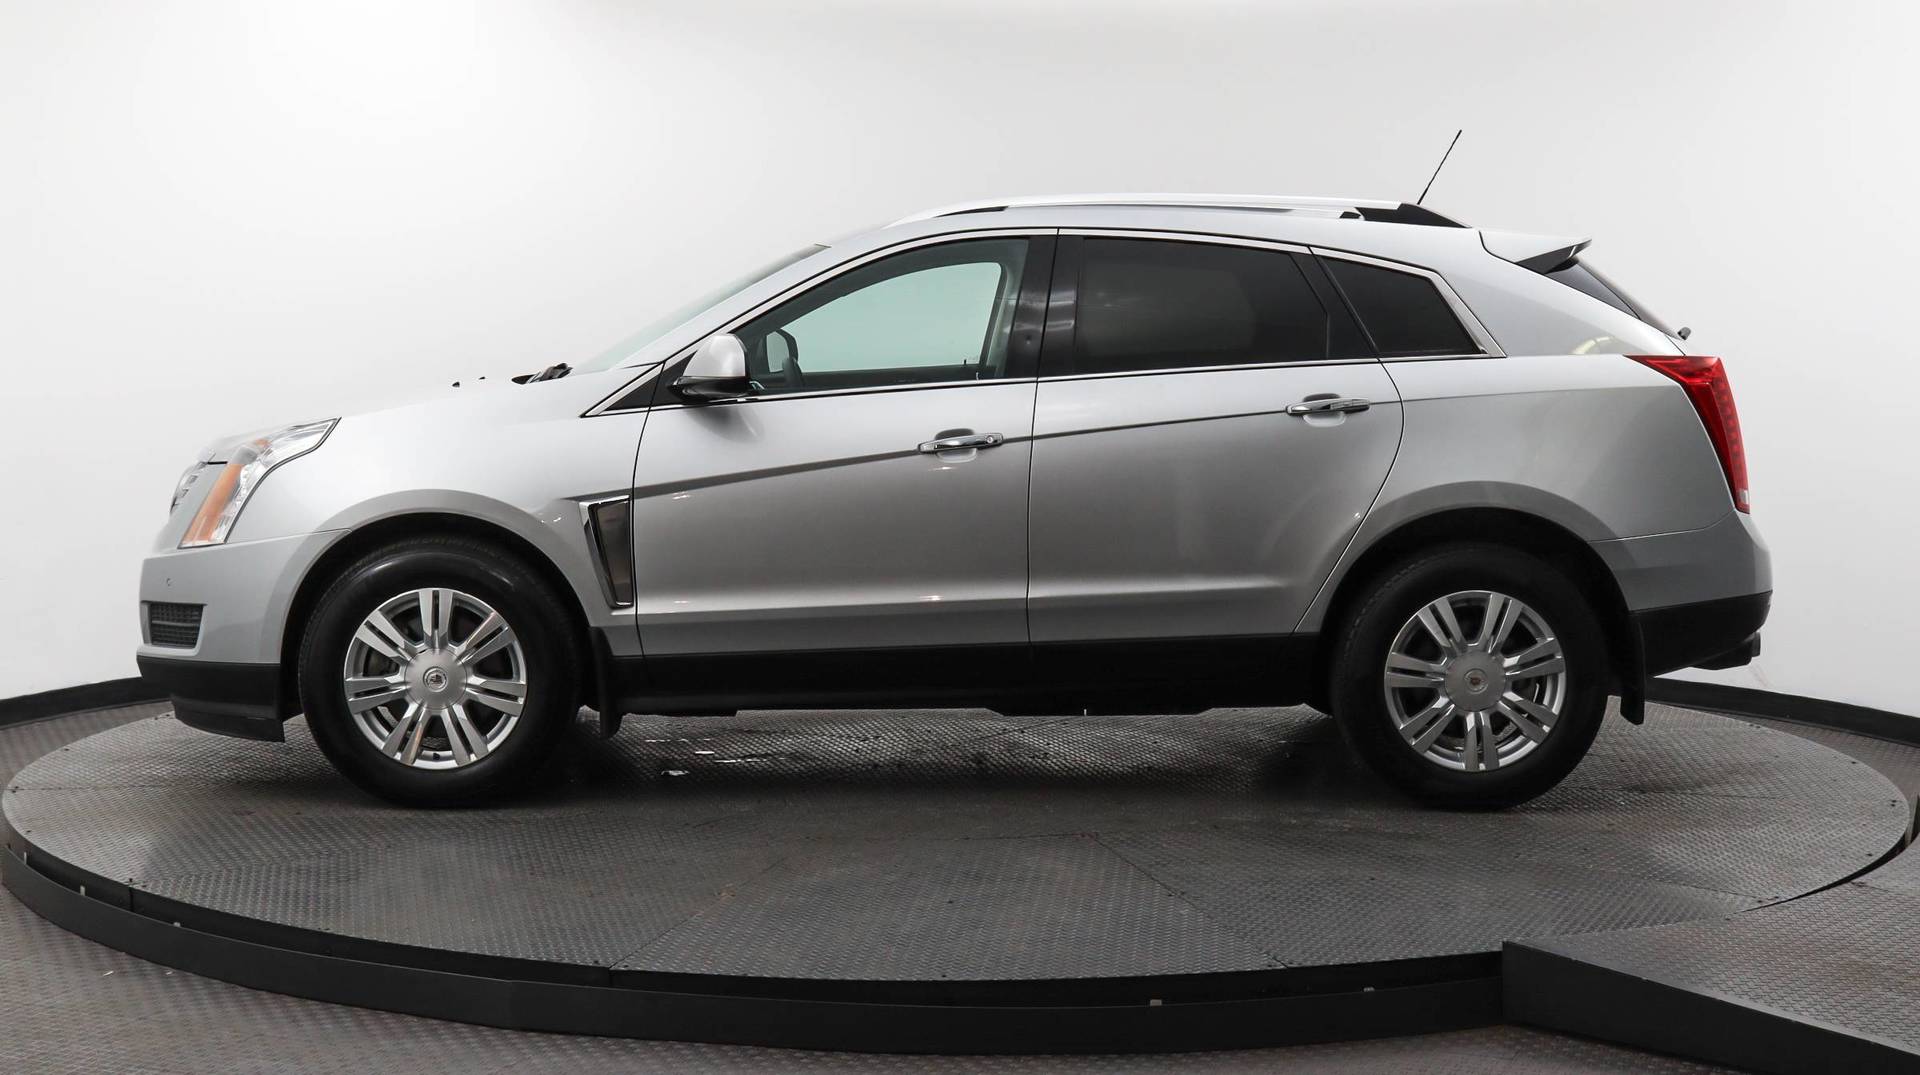 Used 2015 CADILLAC SRX LUXURY COLLECTION for sale in MARGATE | 122163